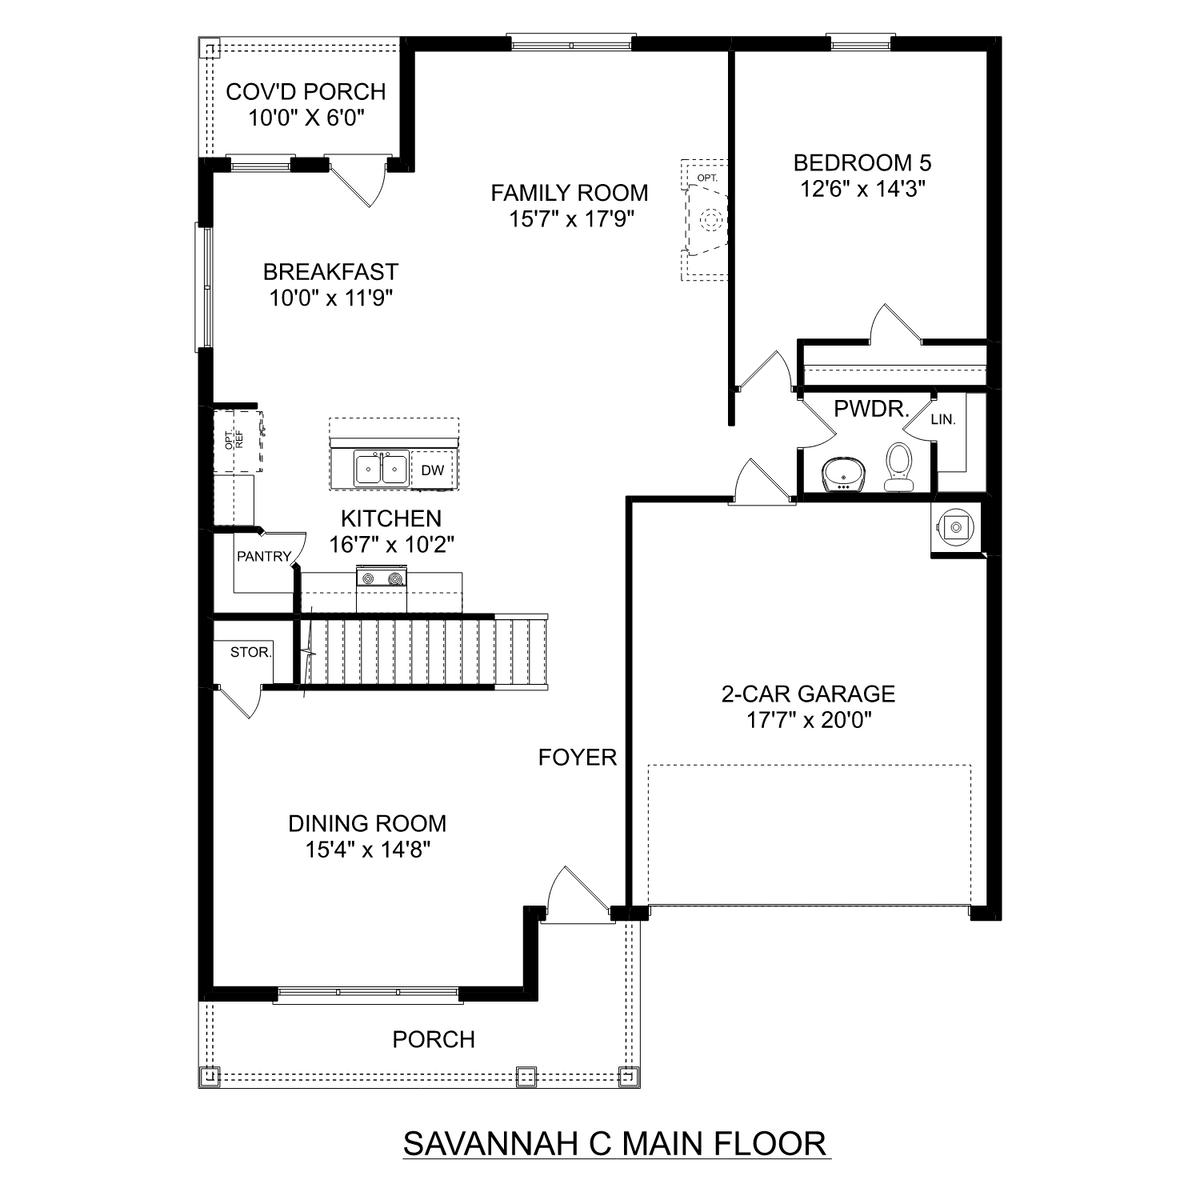 1 - The Savannah C floor plan layout for 12633 Tallulah Drive in Davidson Homes' Newby Chapel community.